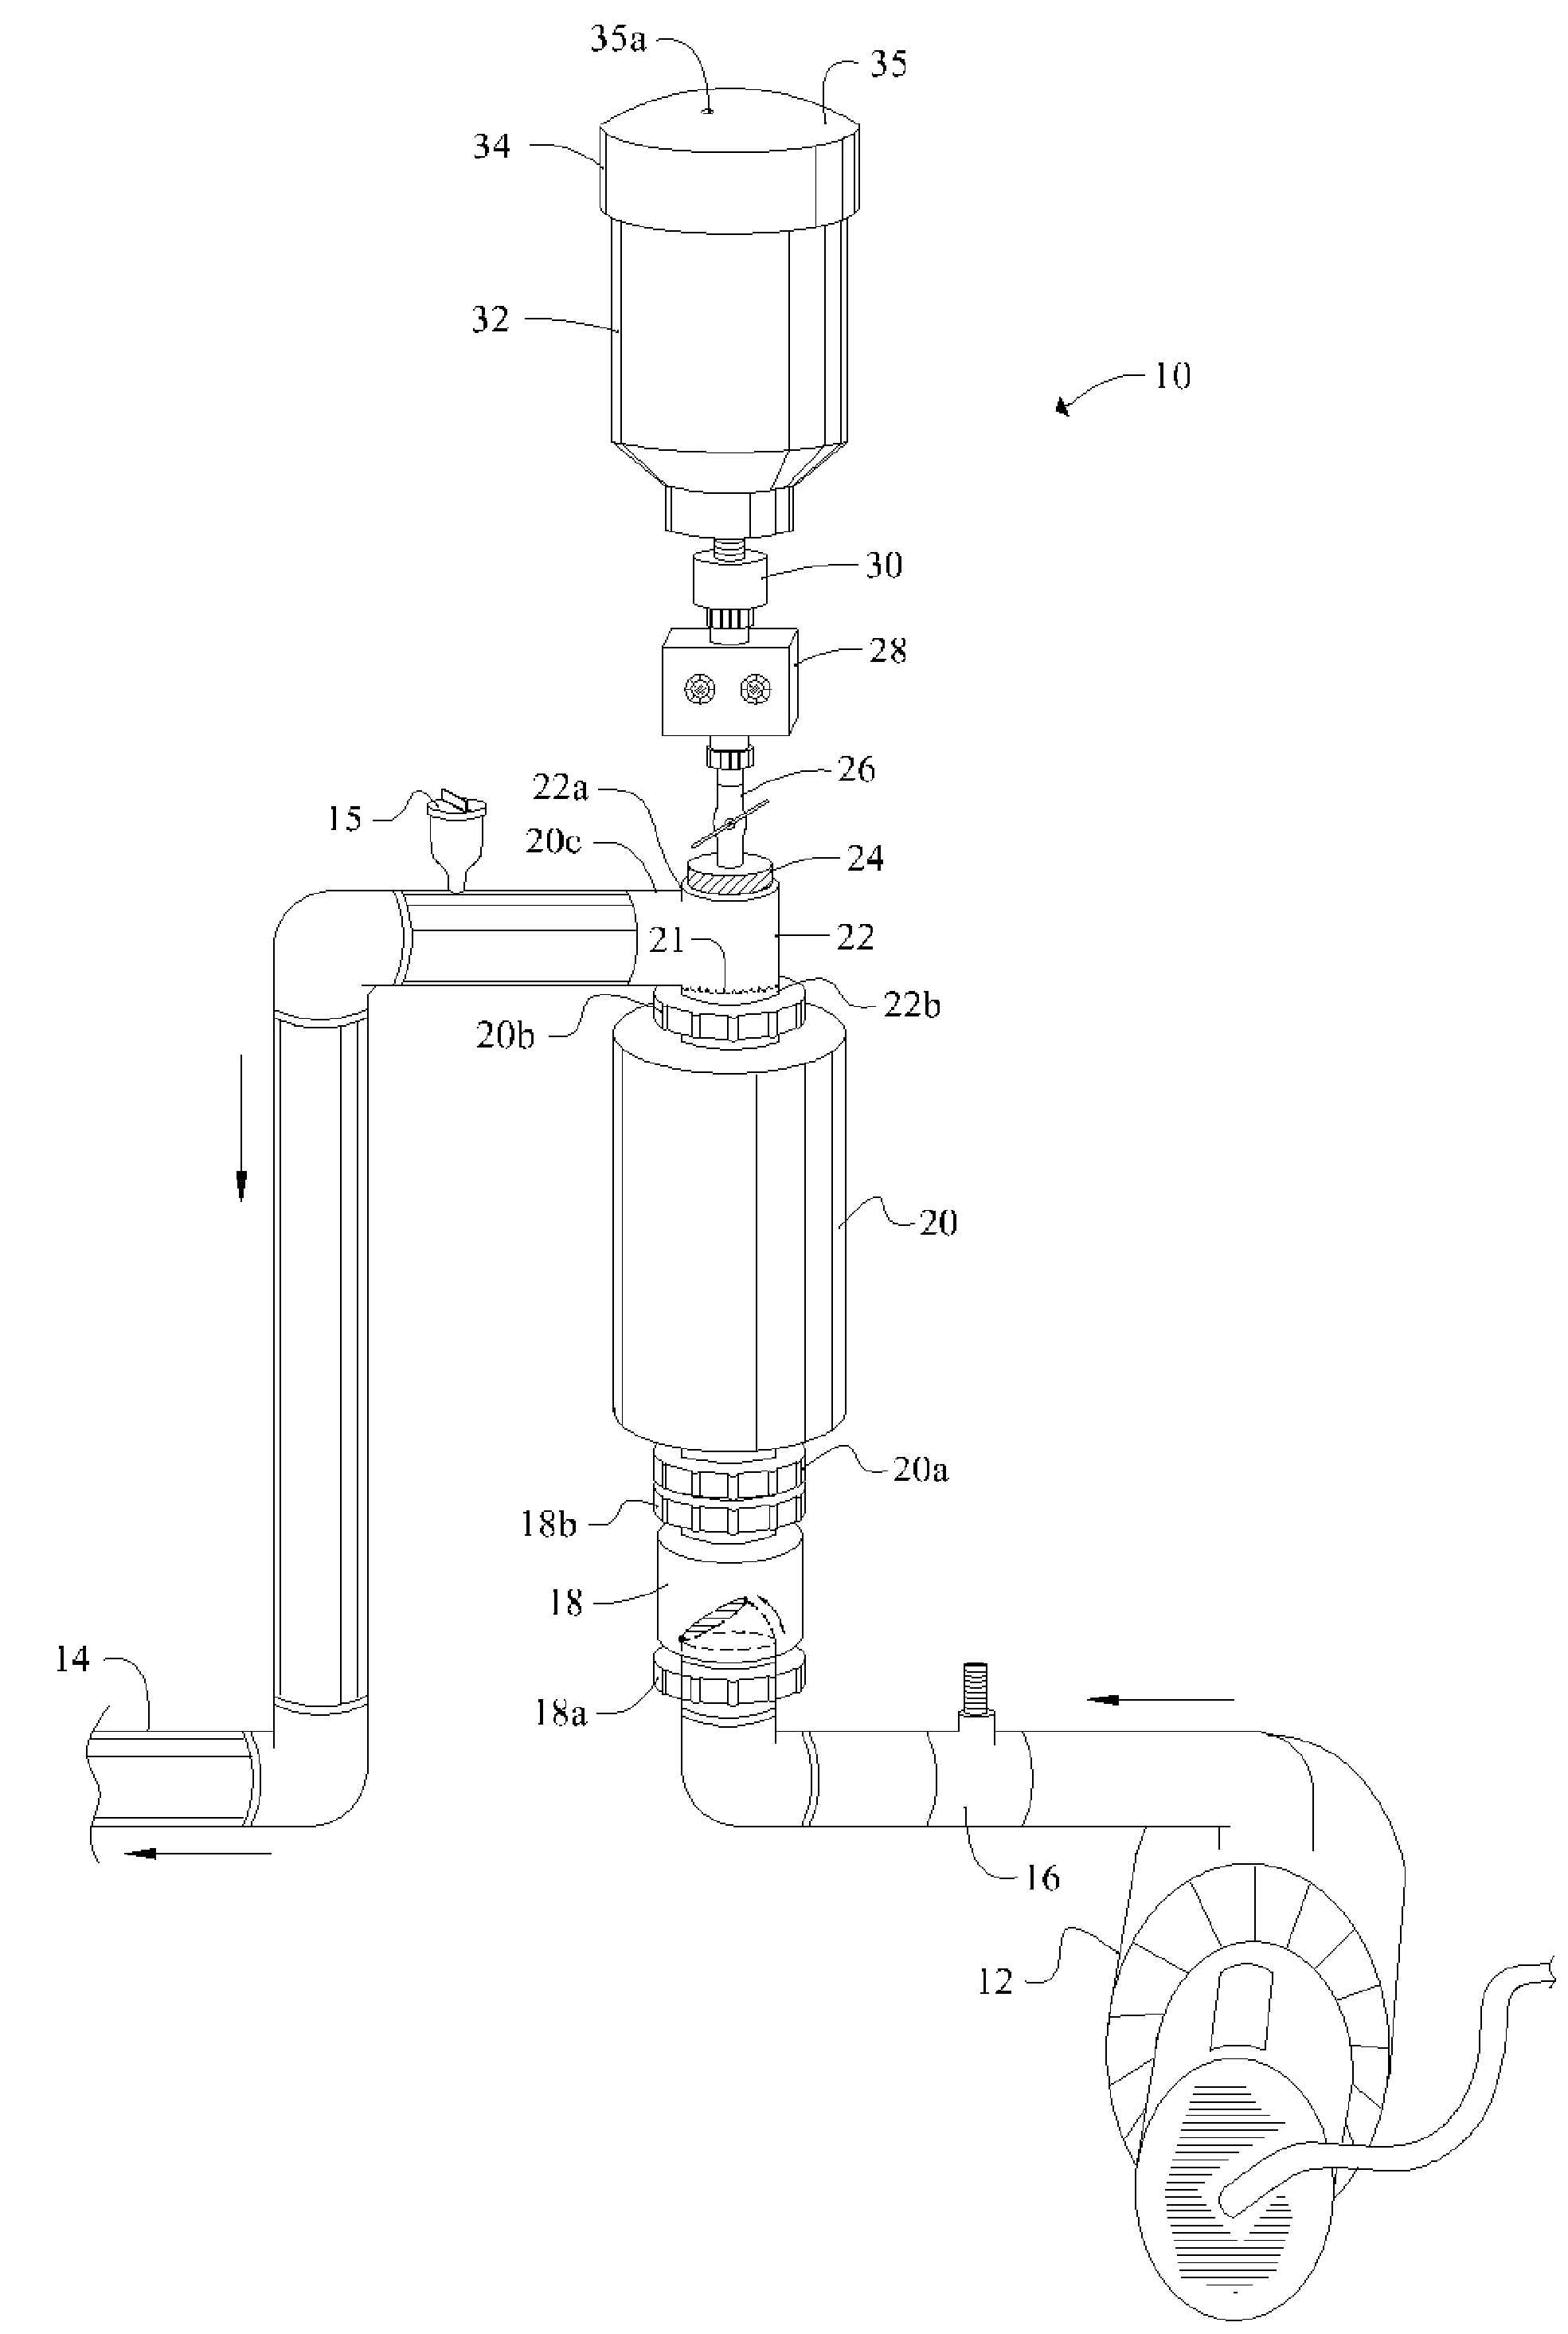 Self-cleaning chlorine generator with pH control